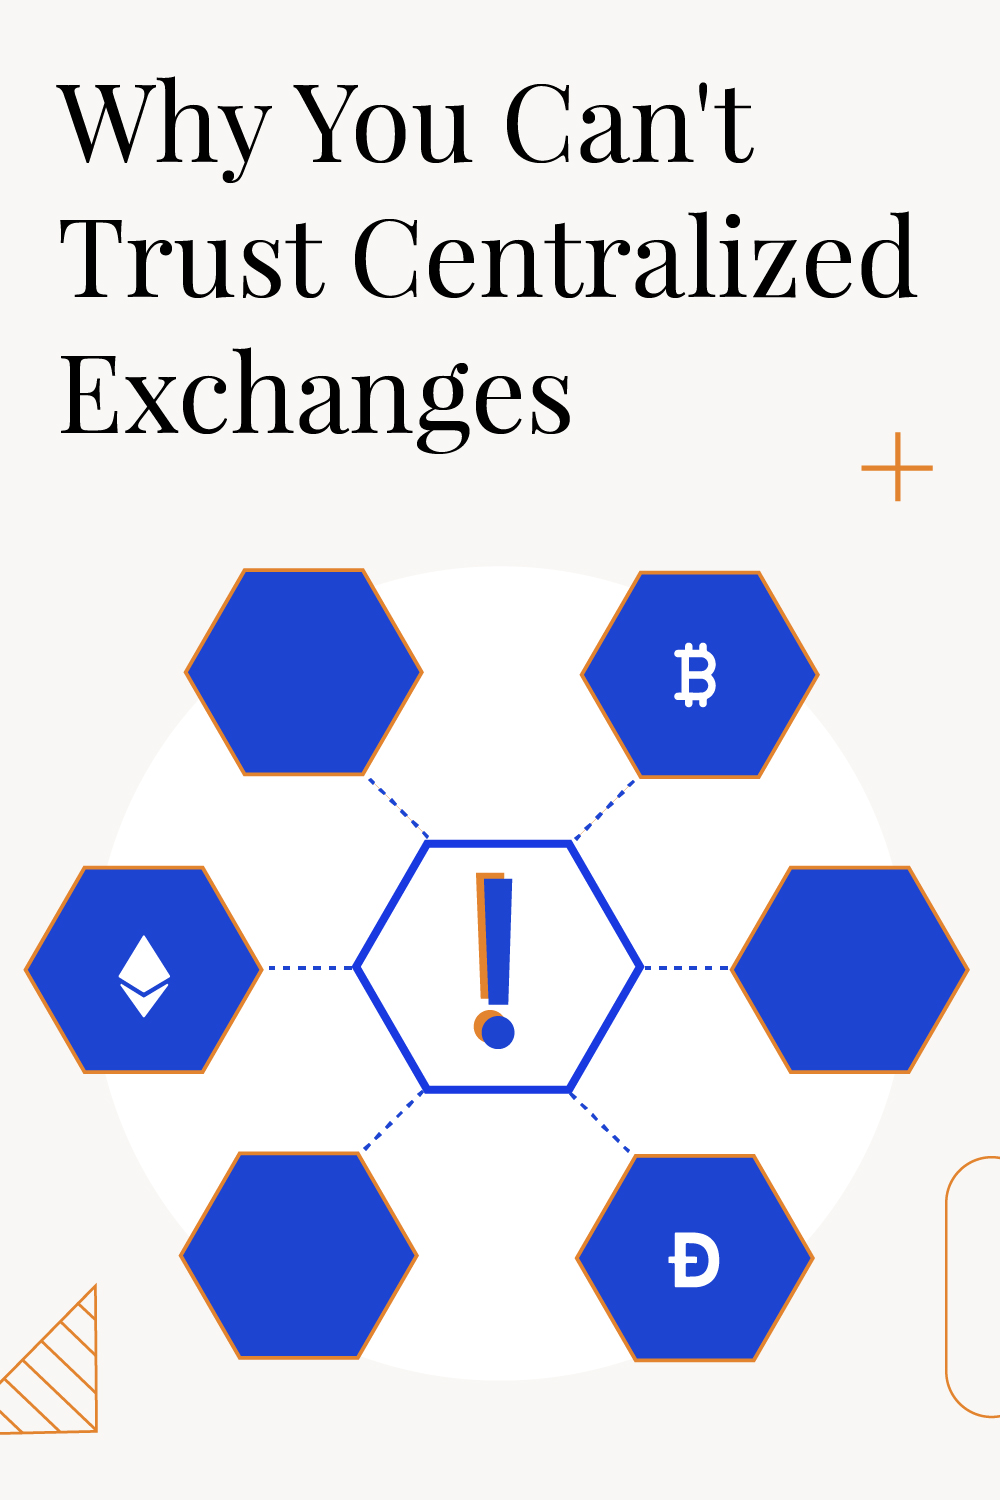 Why You Can’t Trust Centralized Exchanges